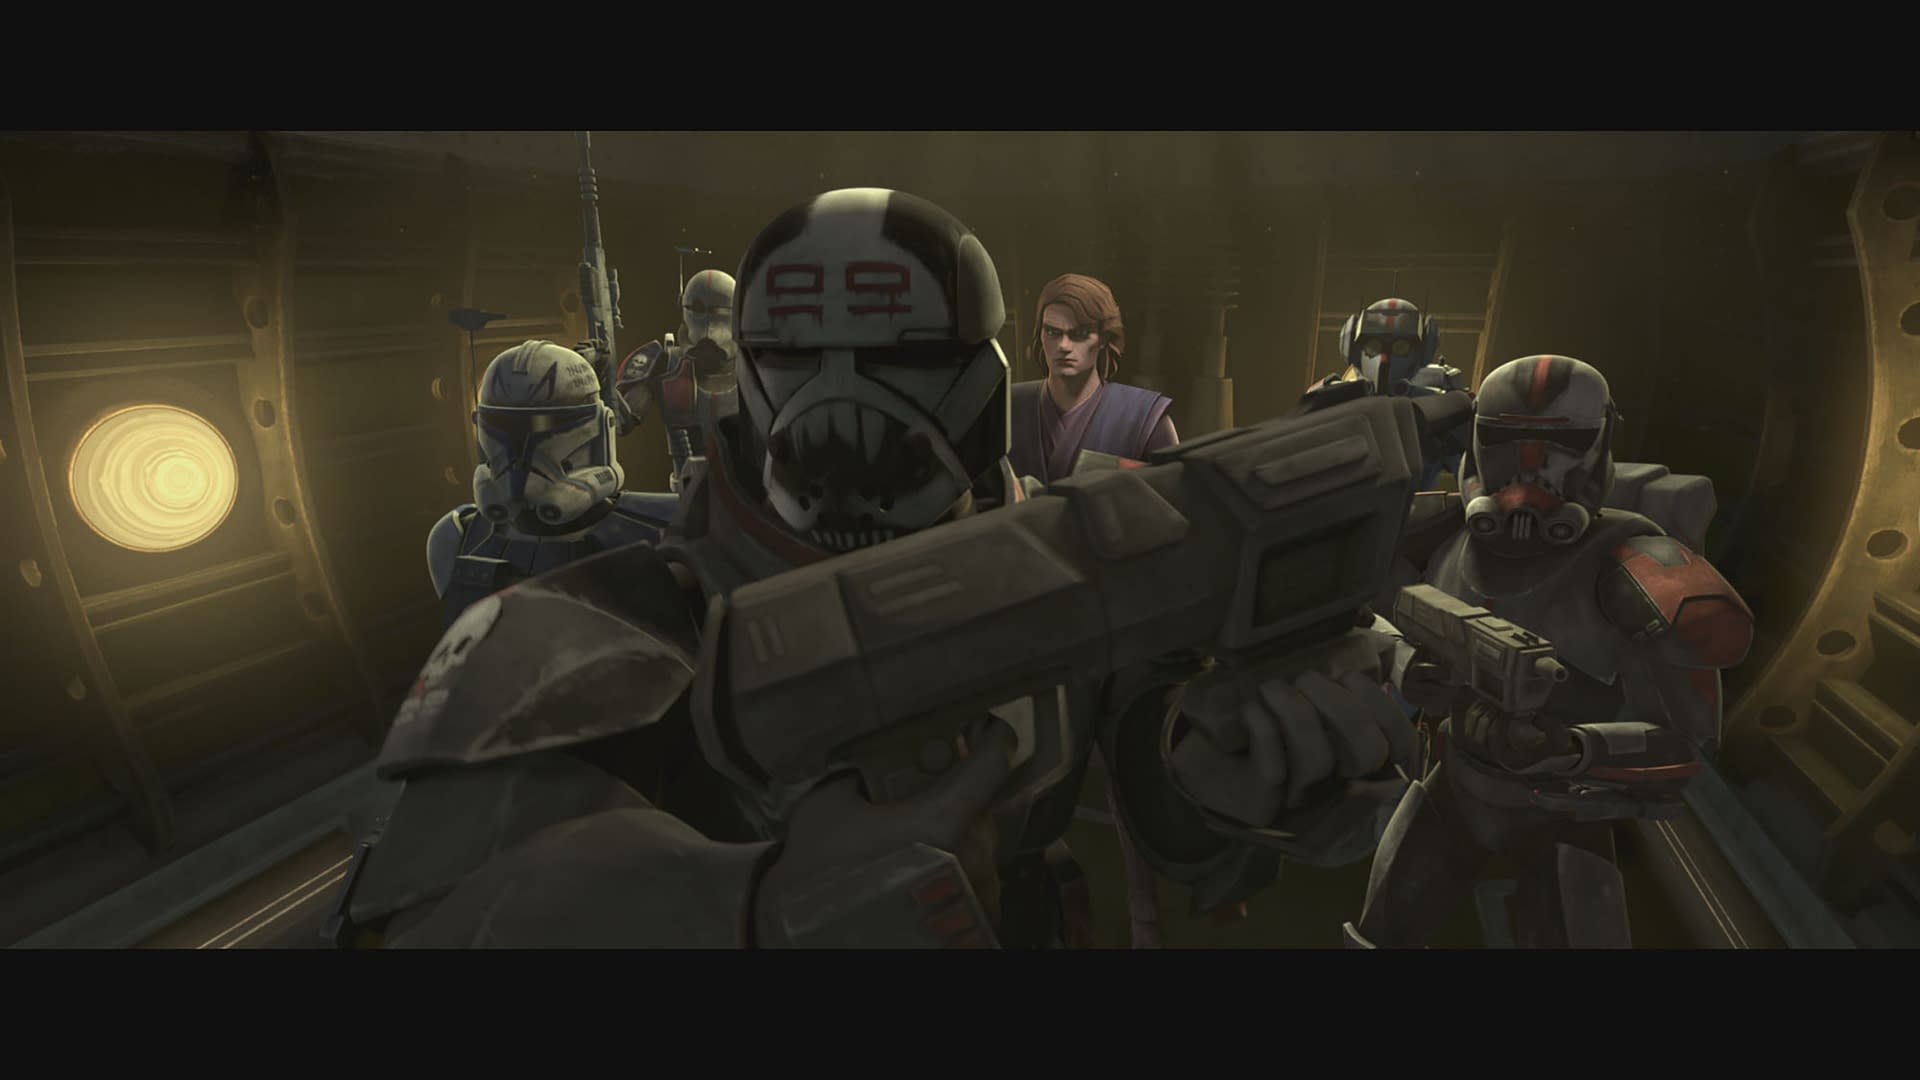 "Star Wars: The Clone Wars" Preview: Rex Is Haunted By "A Distant Echo"